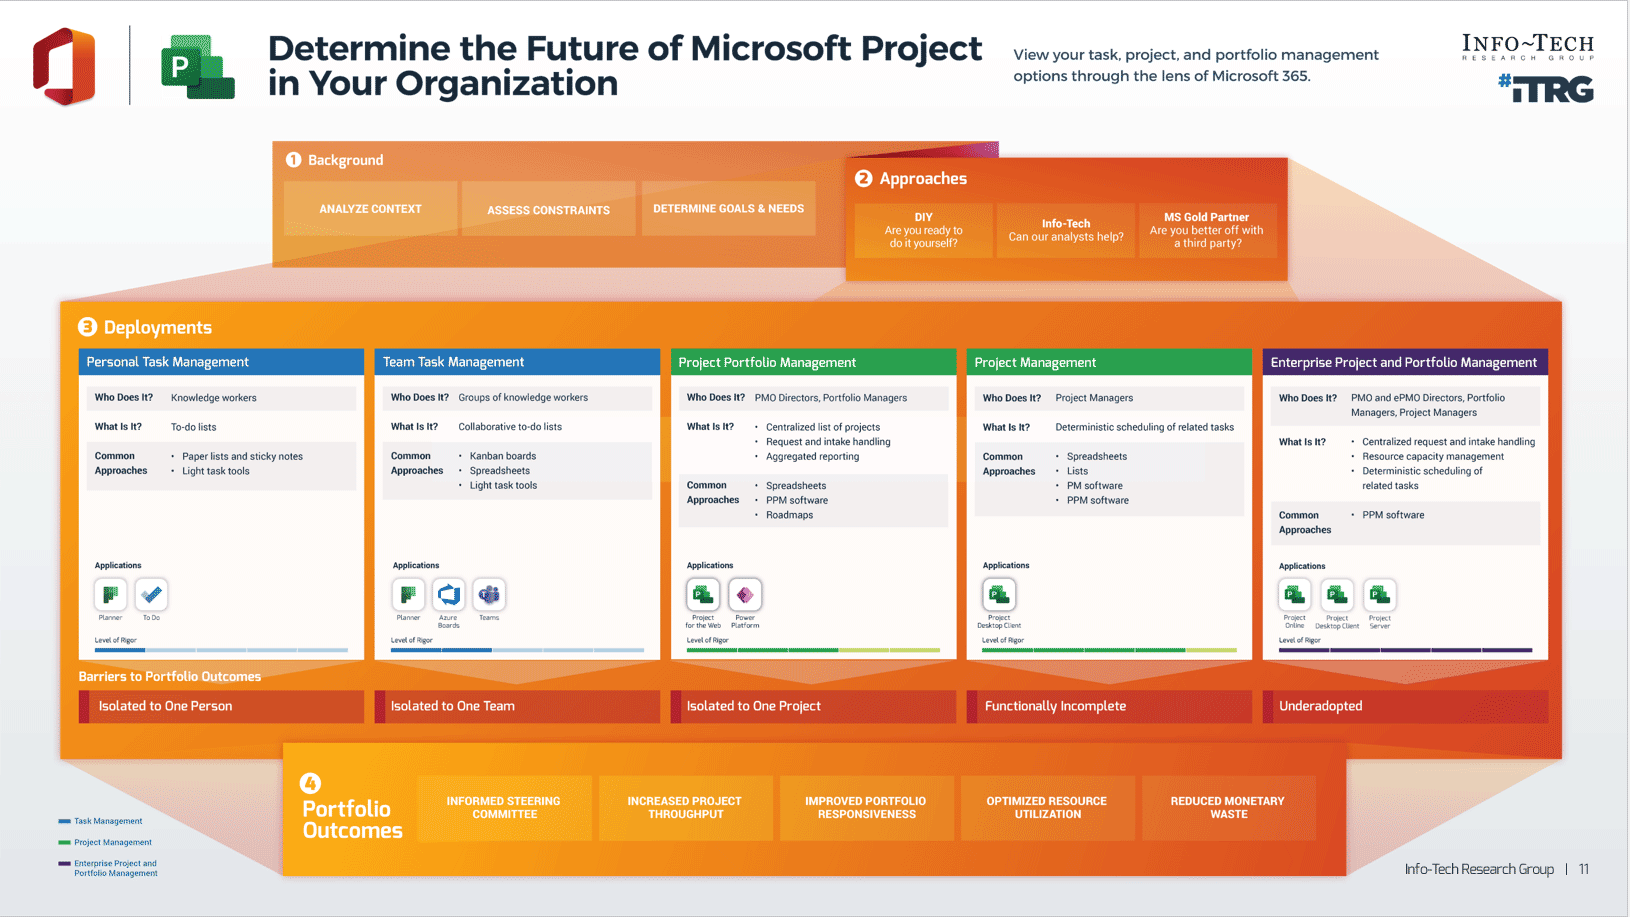 An Info-Tech framework titled 'Determine the Future of Microsoft Project in Your Organization, subtitle 'View your task, project, and portfolio management options through the lens of Microsoft 365'. There are four main sections titled 'Background', 'Approaches', 'Deployments', and 'Portfolio Outcomes'. In '1) Background' are 'Analyze Content', 'Assess Constraints', and 'Determine Goals and Needs'. In '2) Approaches' are 'DIY: Are you ready to do it yourself?' 'Info-Tech: Can our analysts help?', and 'MS Gold Partner: Are you better off with a third party?'. In '3) Deployments' are five sections: 'Personal Task Management', Barriers to Portfolio Outcomes: Isolated to One Person. 'Team Task Management', Barriers to Portfolio Outcomes: Isolated to One Team. 'Project Portfolio Management', Barriers to Portfolio Outcomes: Isolated to One Project. 'Project Management', Barriers to Portfolio Outcomes: Functionally Incomplete. 'Enterprise Project and Portfolio Management', Barriers to Portfolio Outcomes: Underadopted. In '4) Portfolio Outcomes' are 'Informed Steering Committee', 'Increased Project Throughput', 'Improved Portfolio Responsiveness', 'Optimized Resource Utilization', and 'Reduced Monetary Waste'.